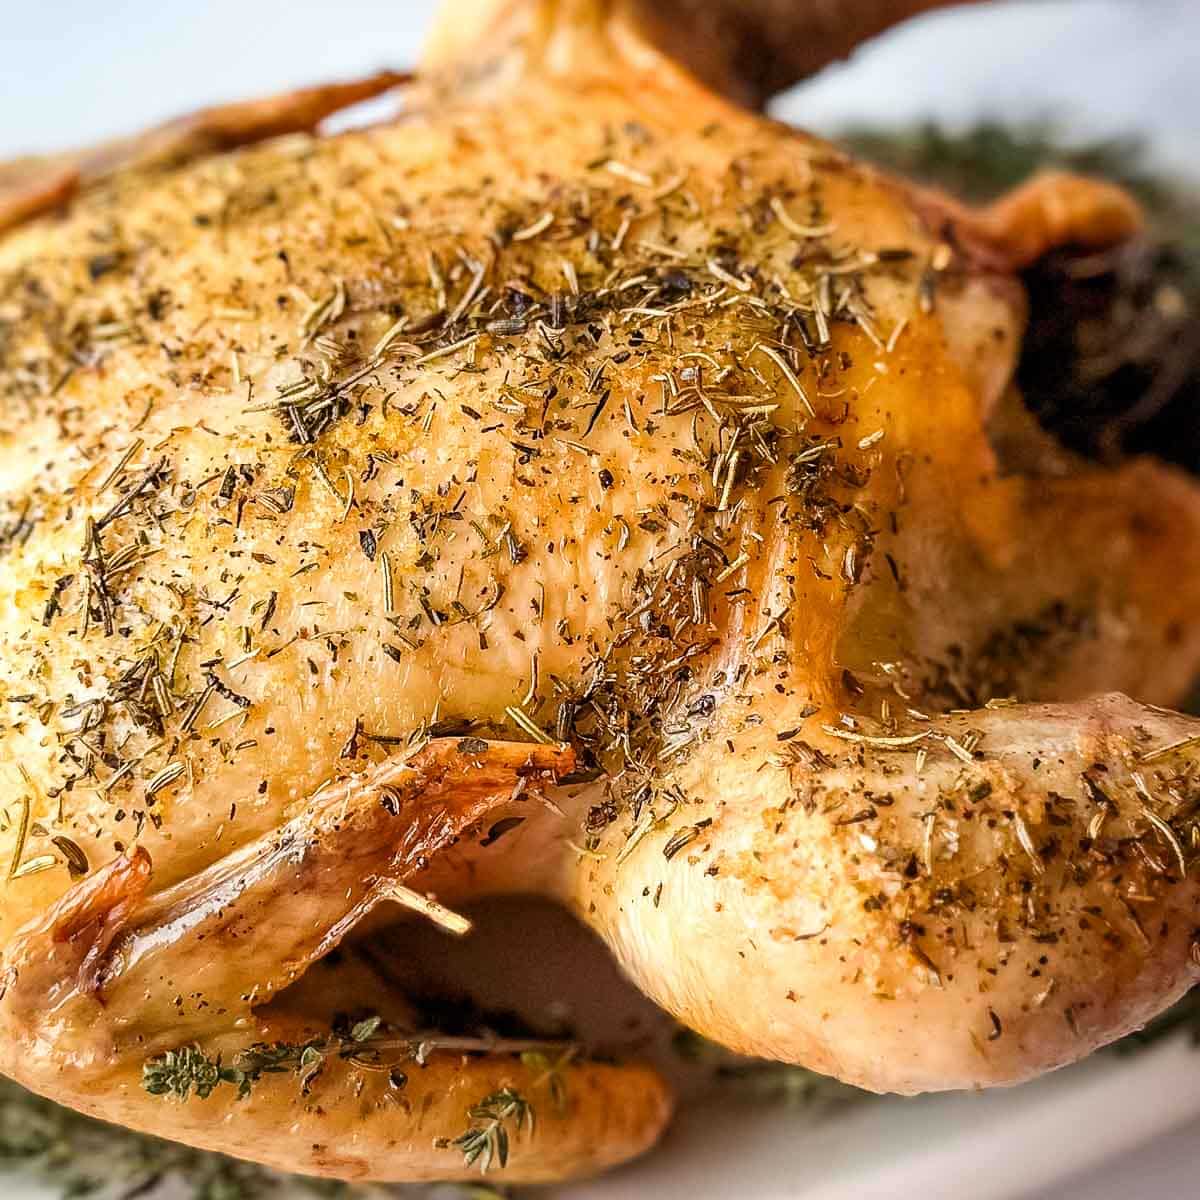 A roasted chicken with herbs on a white plate.